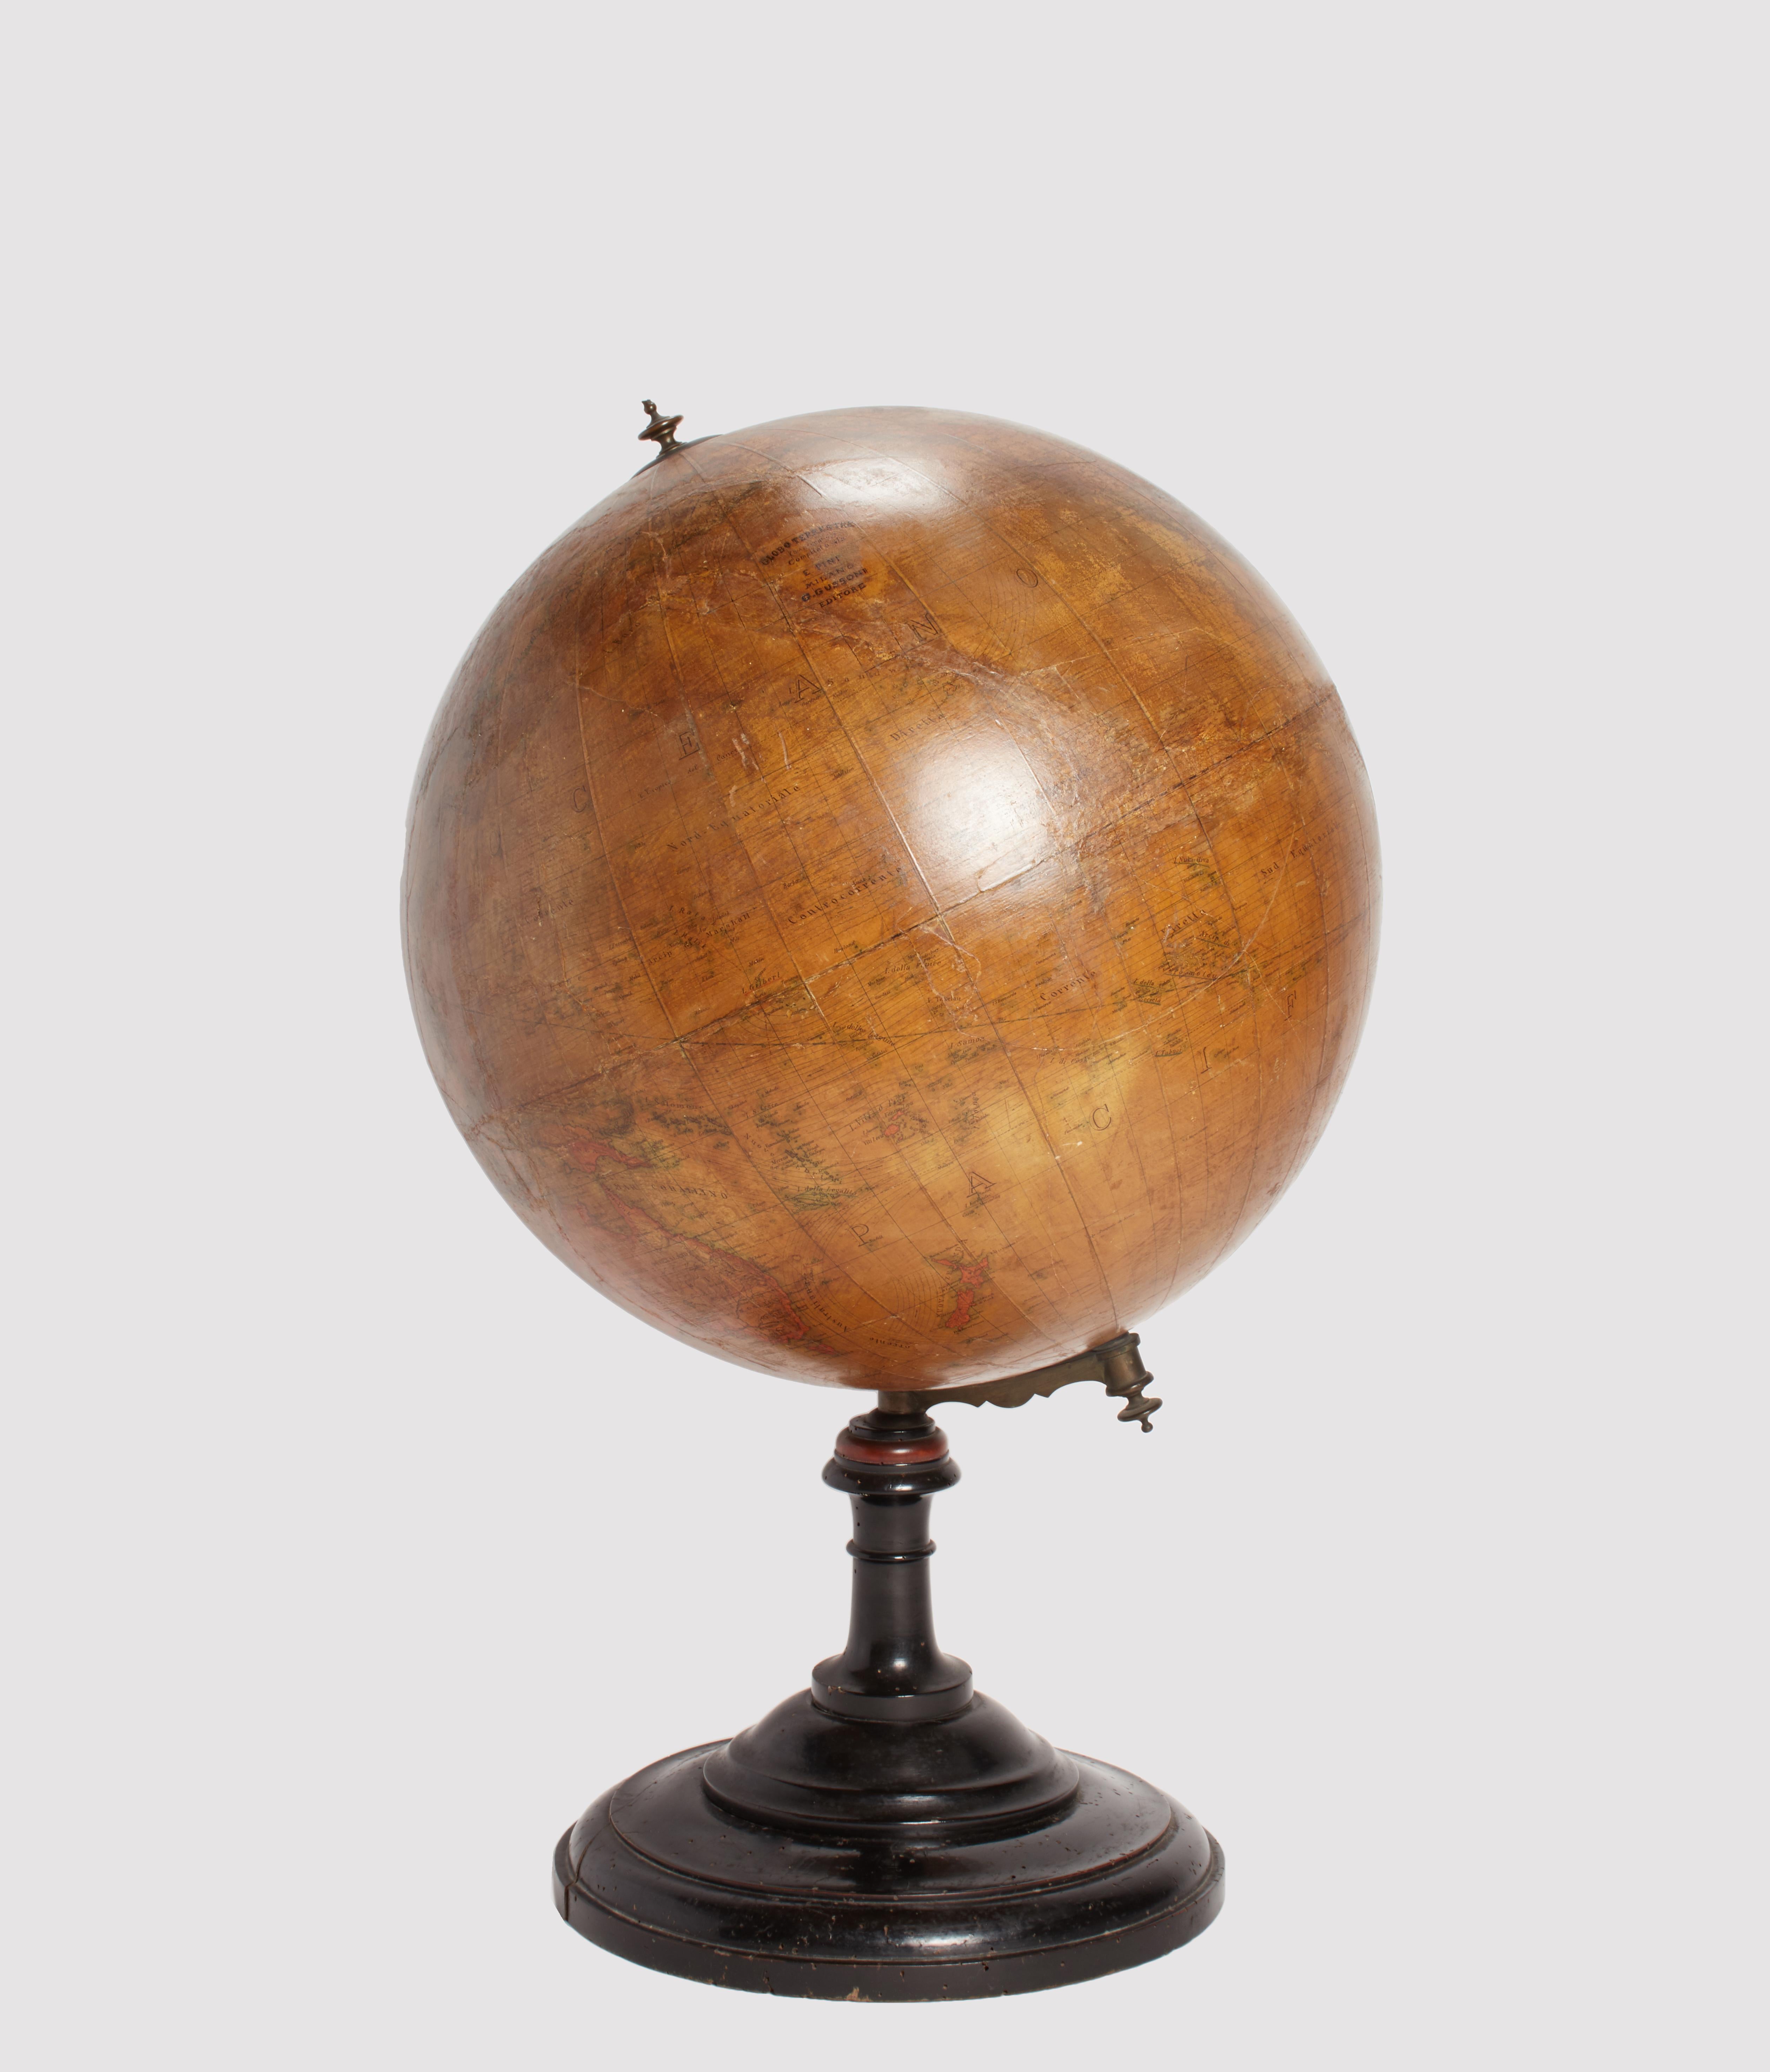 Large terrestrial globe (diameter 19,75”), made of paper mache on a wooden structure. The large turned base is made of black lacquered walnut wood. Cartography compiled by engineer E. Pini. Edited by G. Gussoni. Milan, Italy circa 1880.